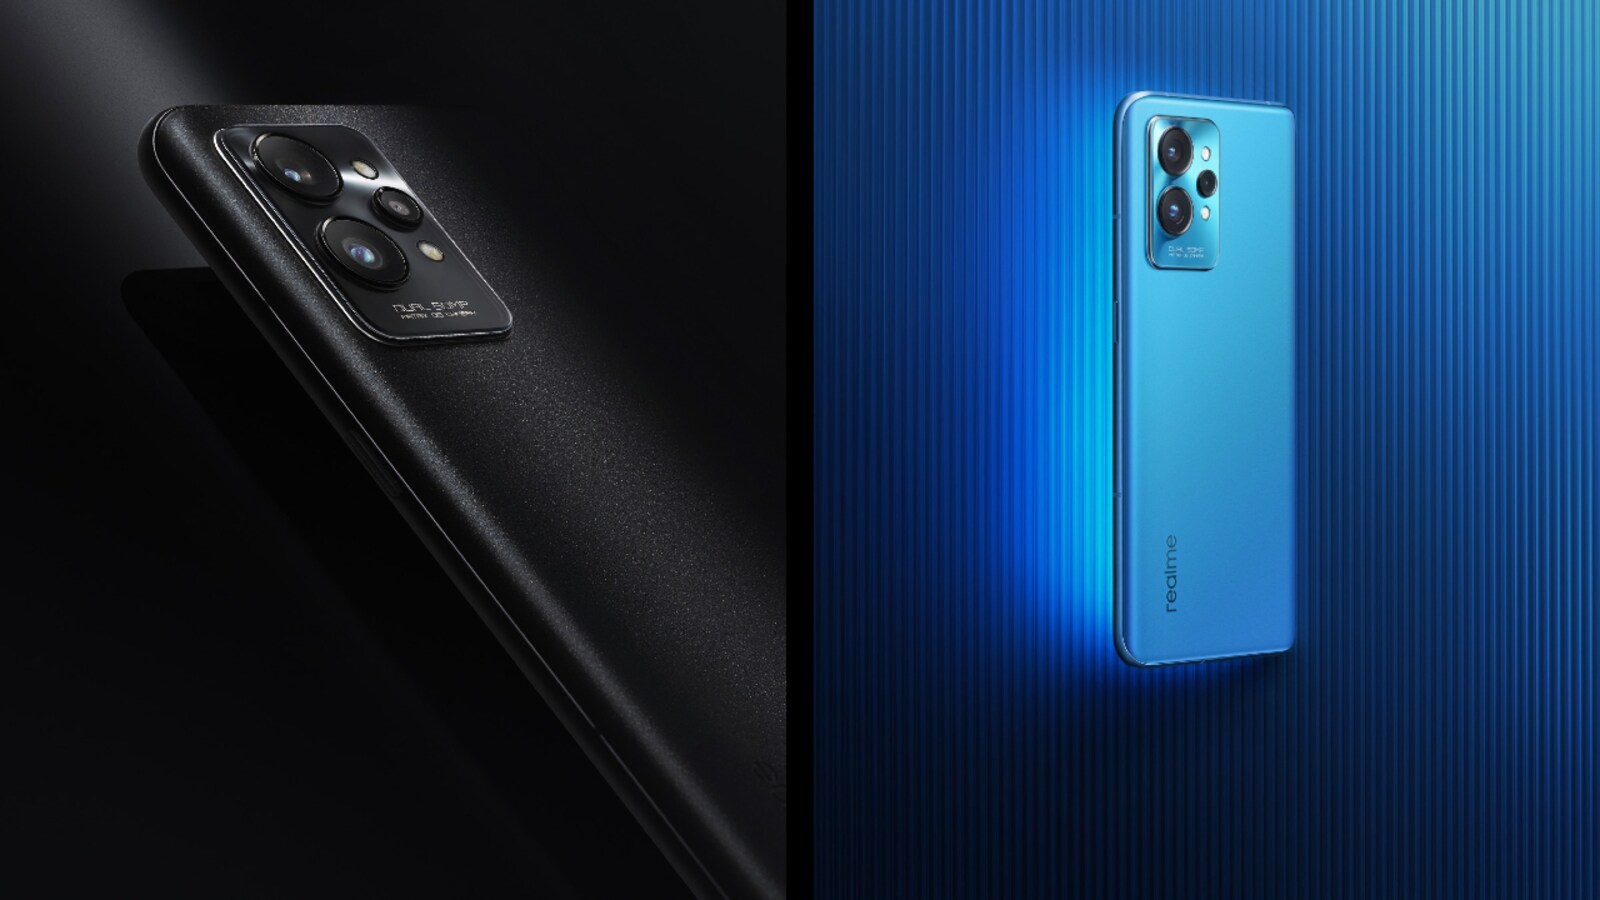 Realme GT 2, GT 2 Pro With Snapdragon SoCs, Triple Cameras Launched: Price,  Specifications